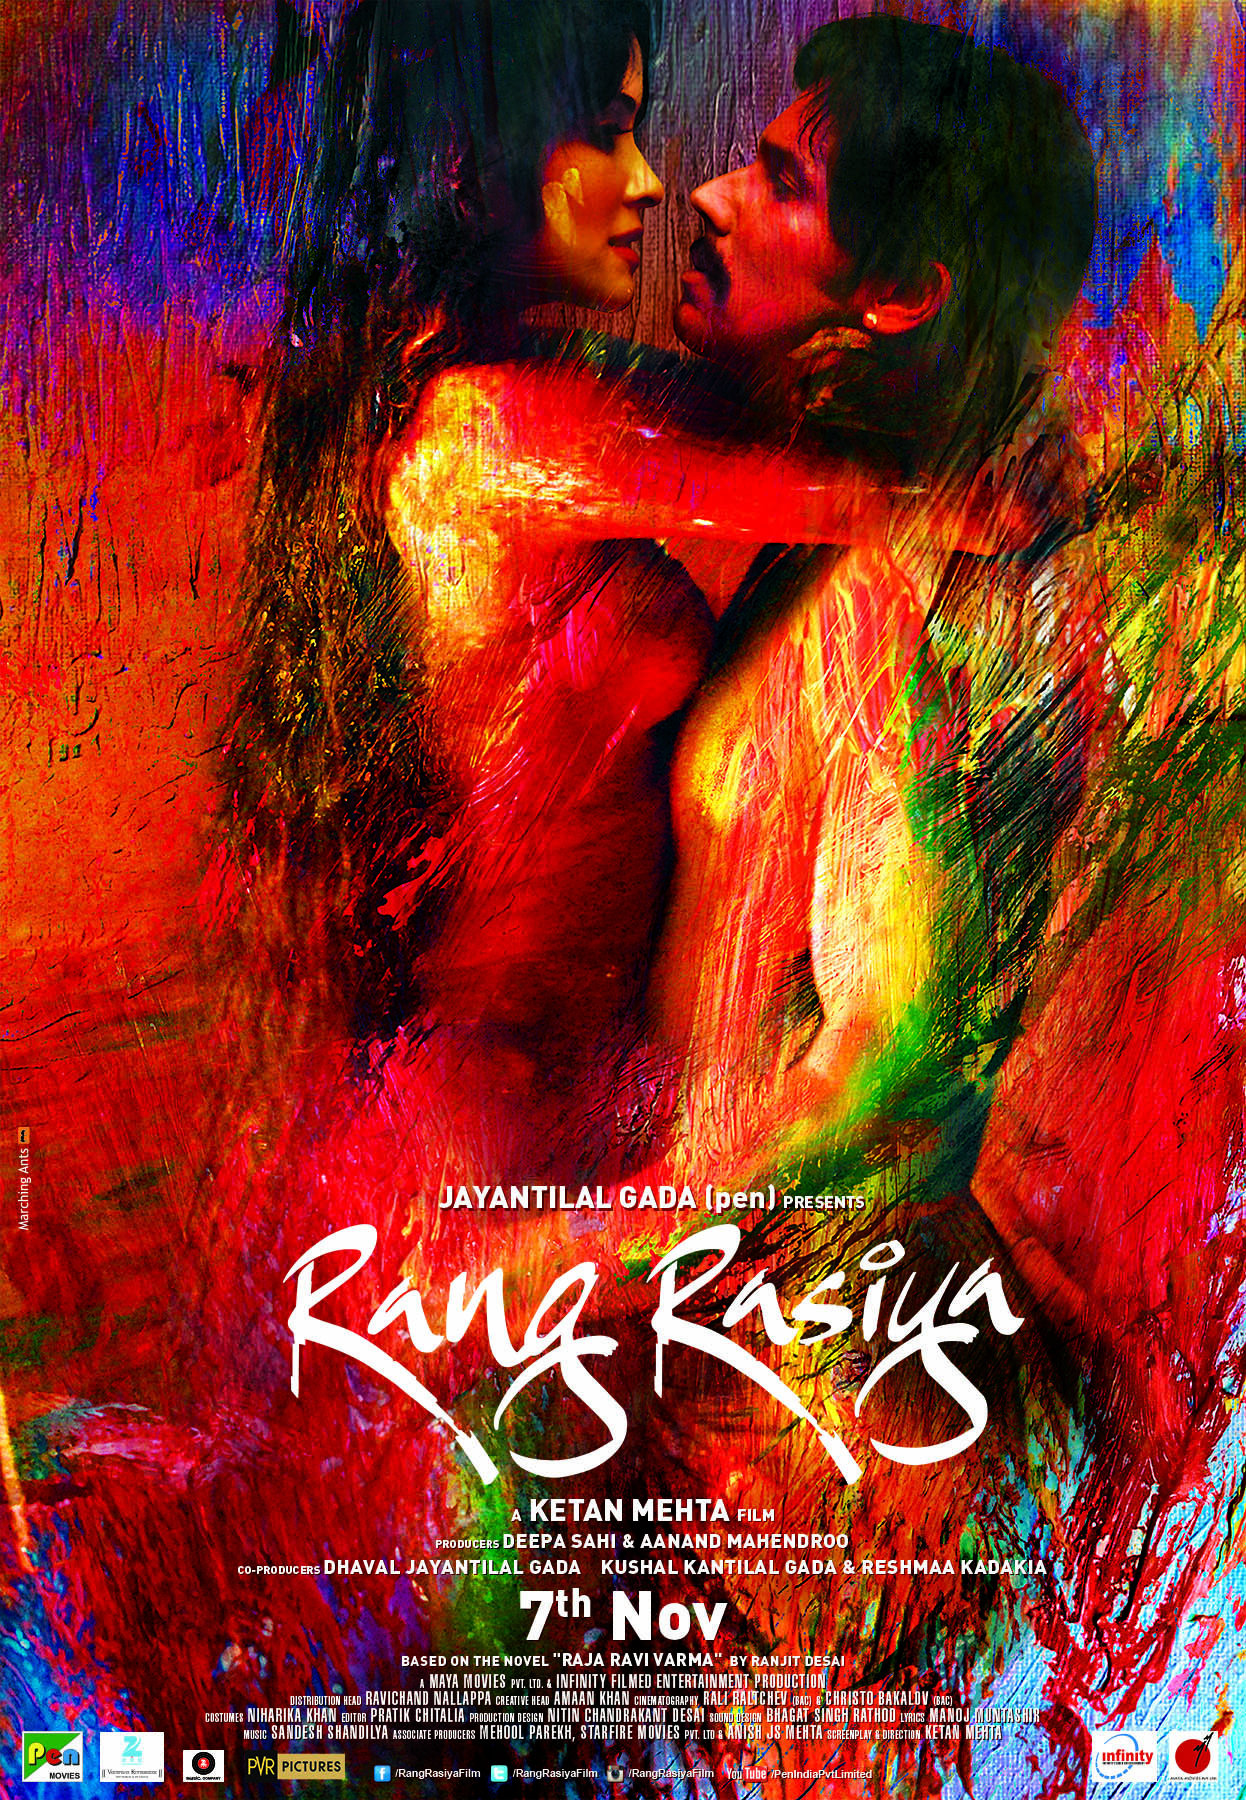 anthony wimmer recommends rang rasiya movie online pic